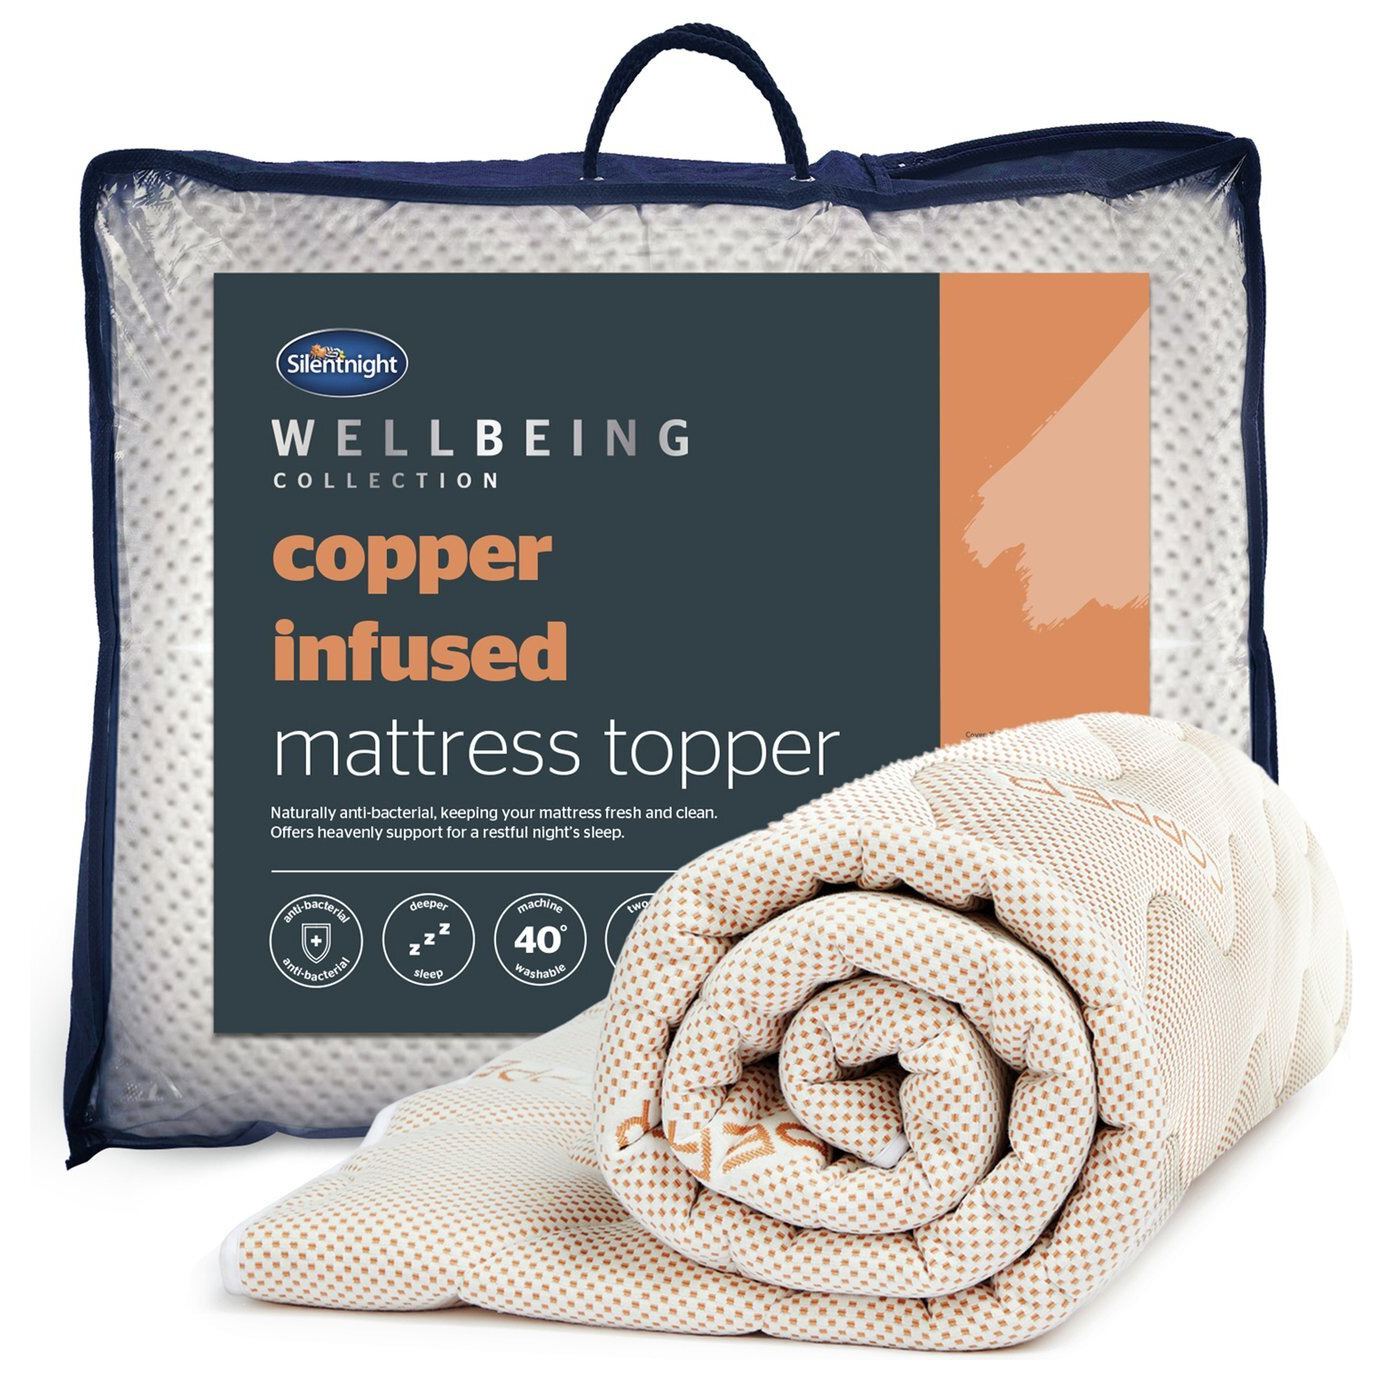 Silentnight Wellbeing Copper Infused Mattress Topper - SK - image 1